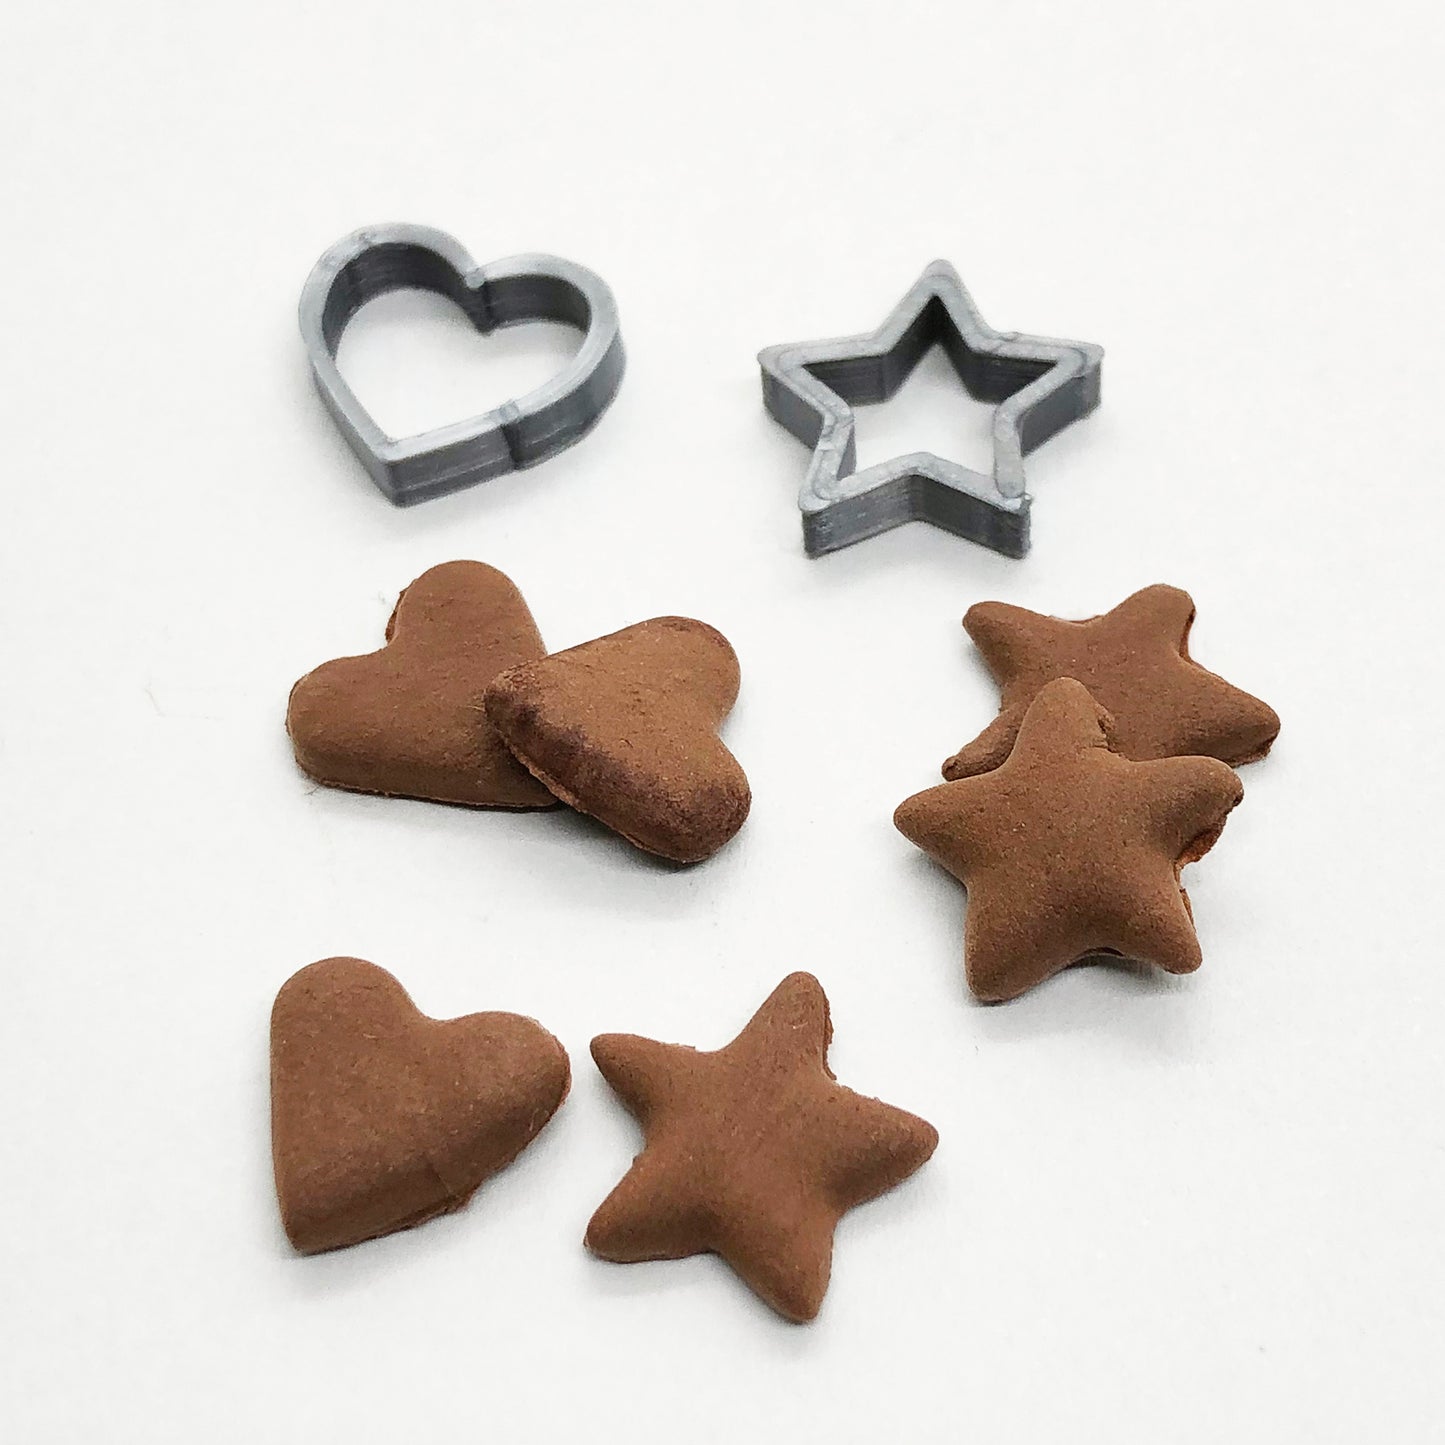 Gingerbread molds and cookies